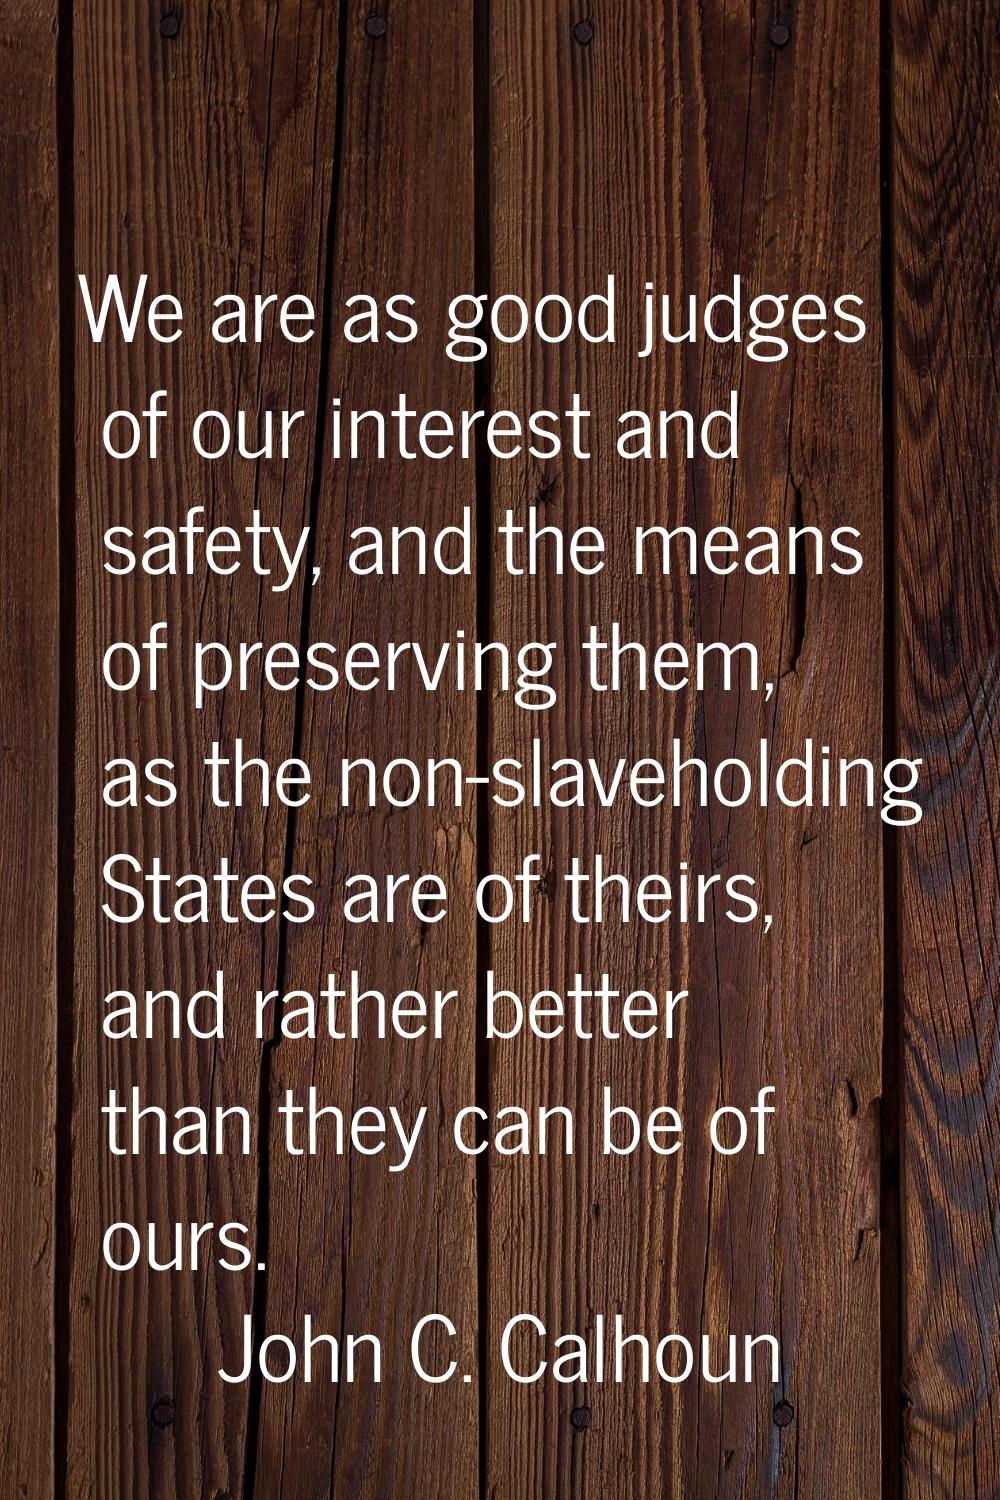 We are as good judges of our interest and safety, and the means of preserving them, as the non-slav